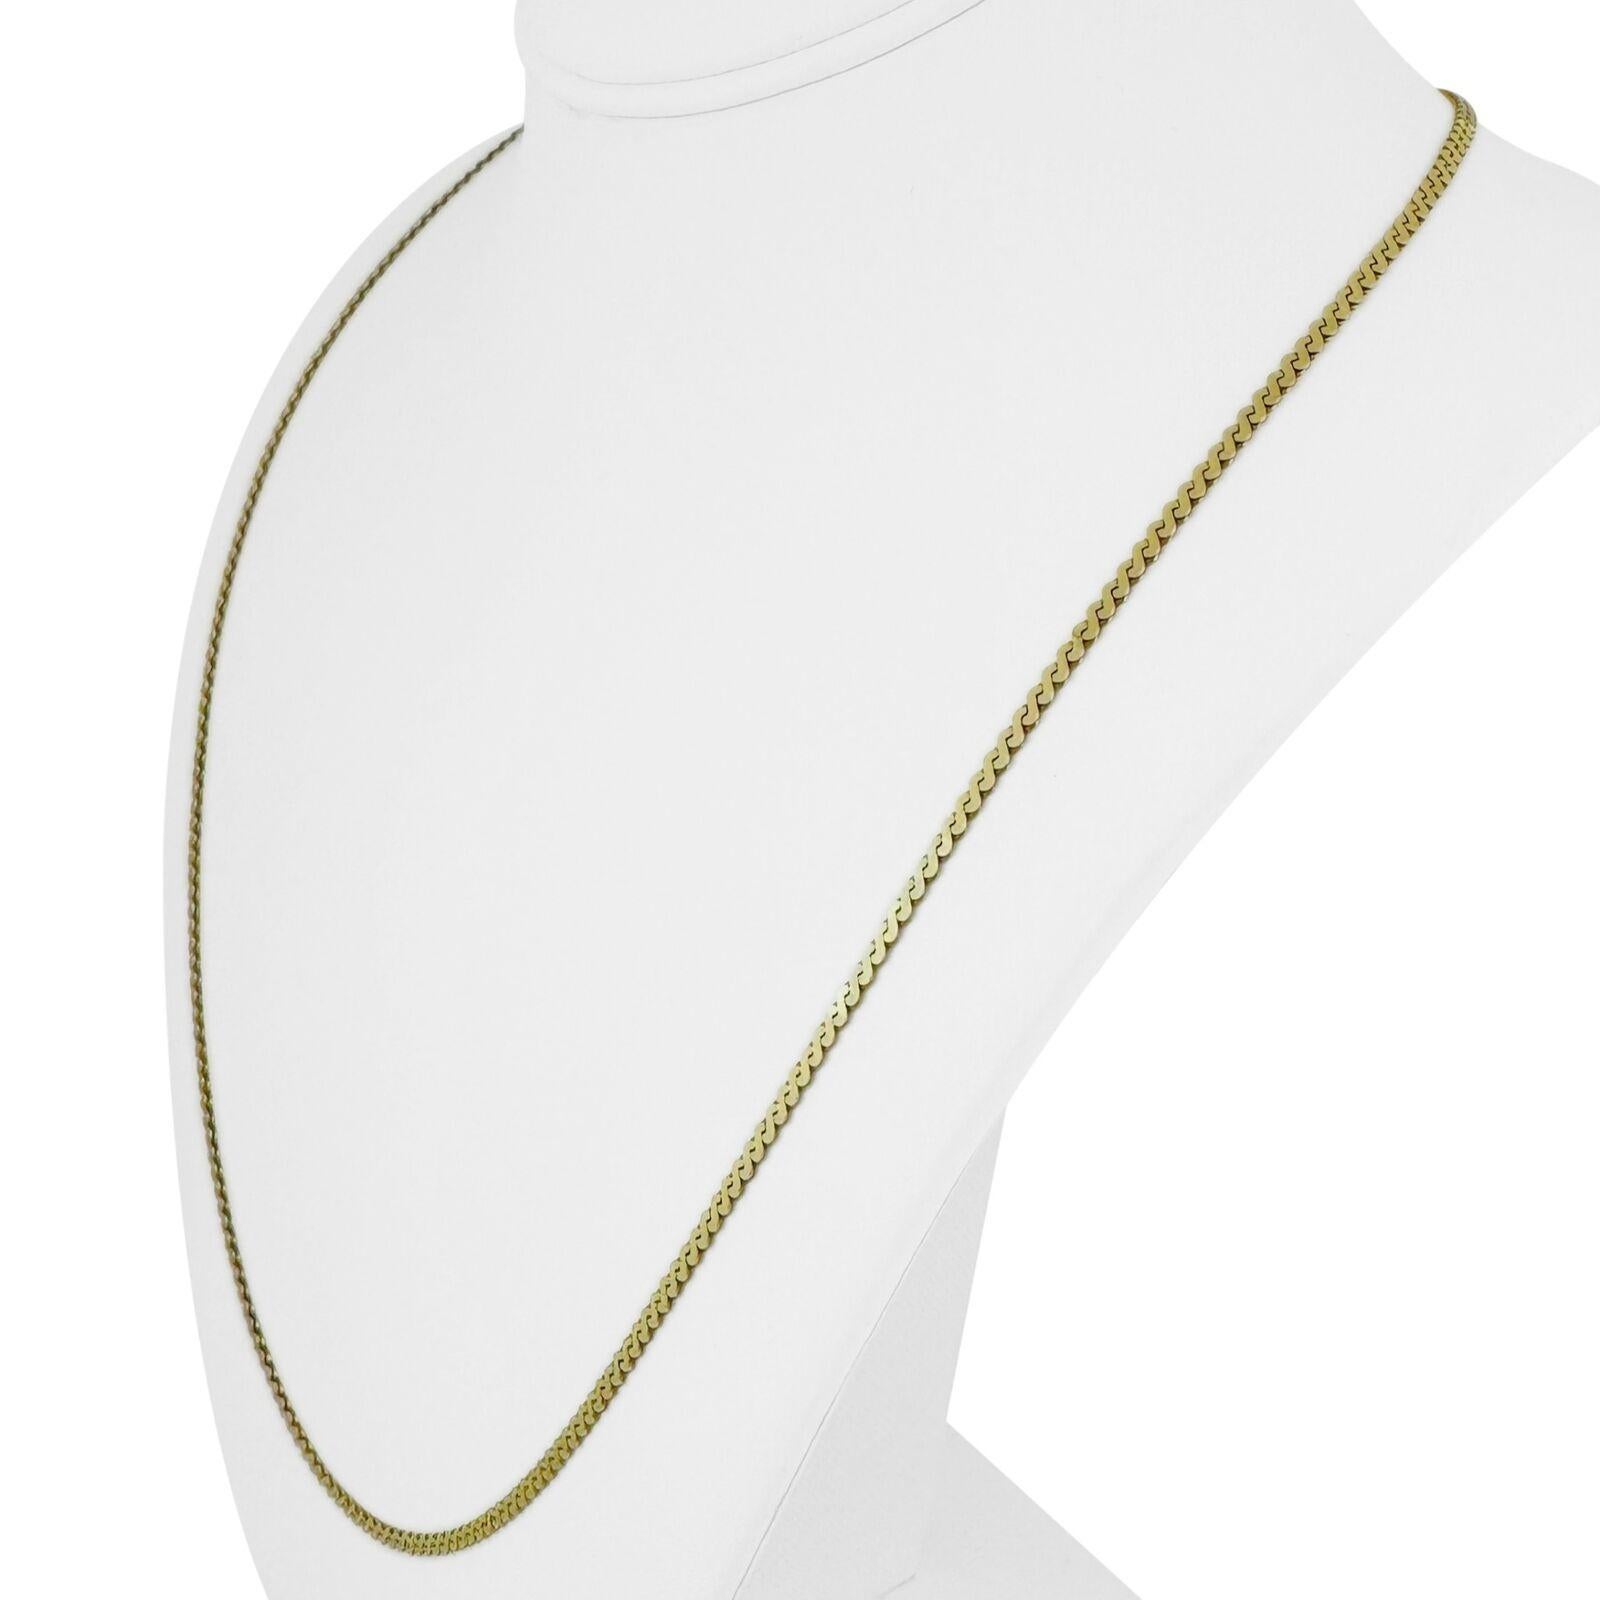 14k Yellow Gold 11.7g Solid UnoAErre 2.5mm Serpentine Link Necklace Italy 24